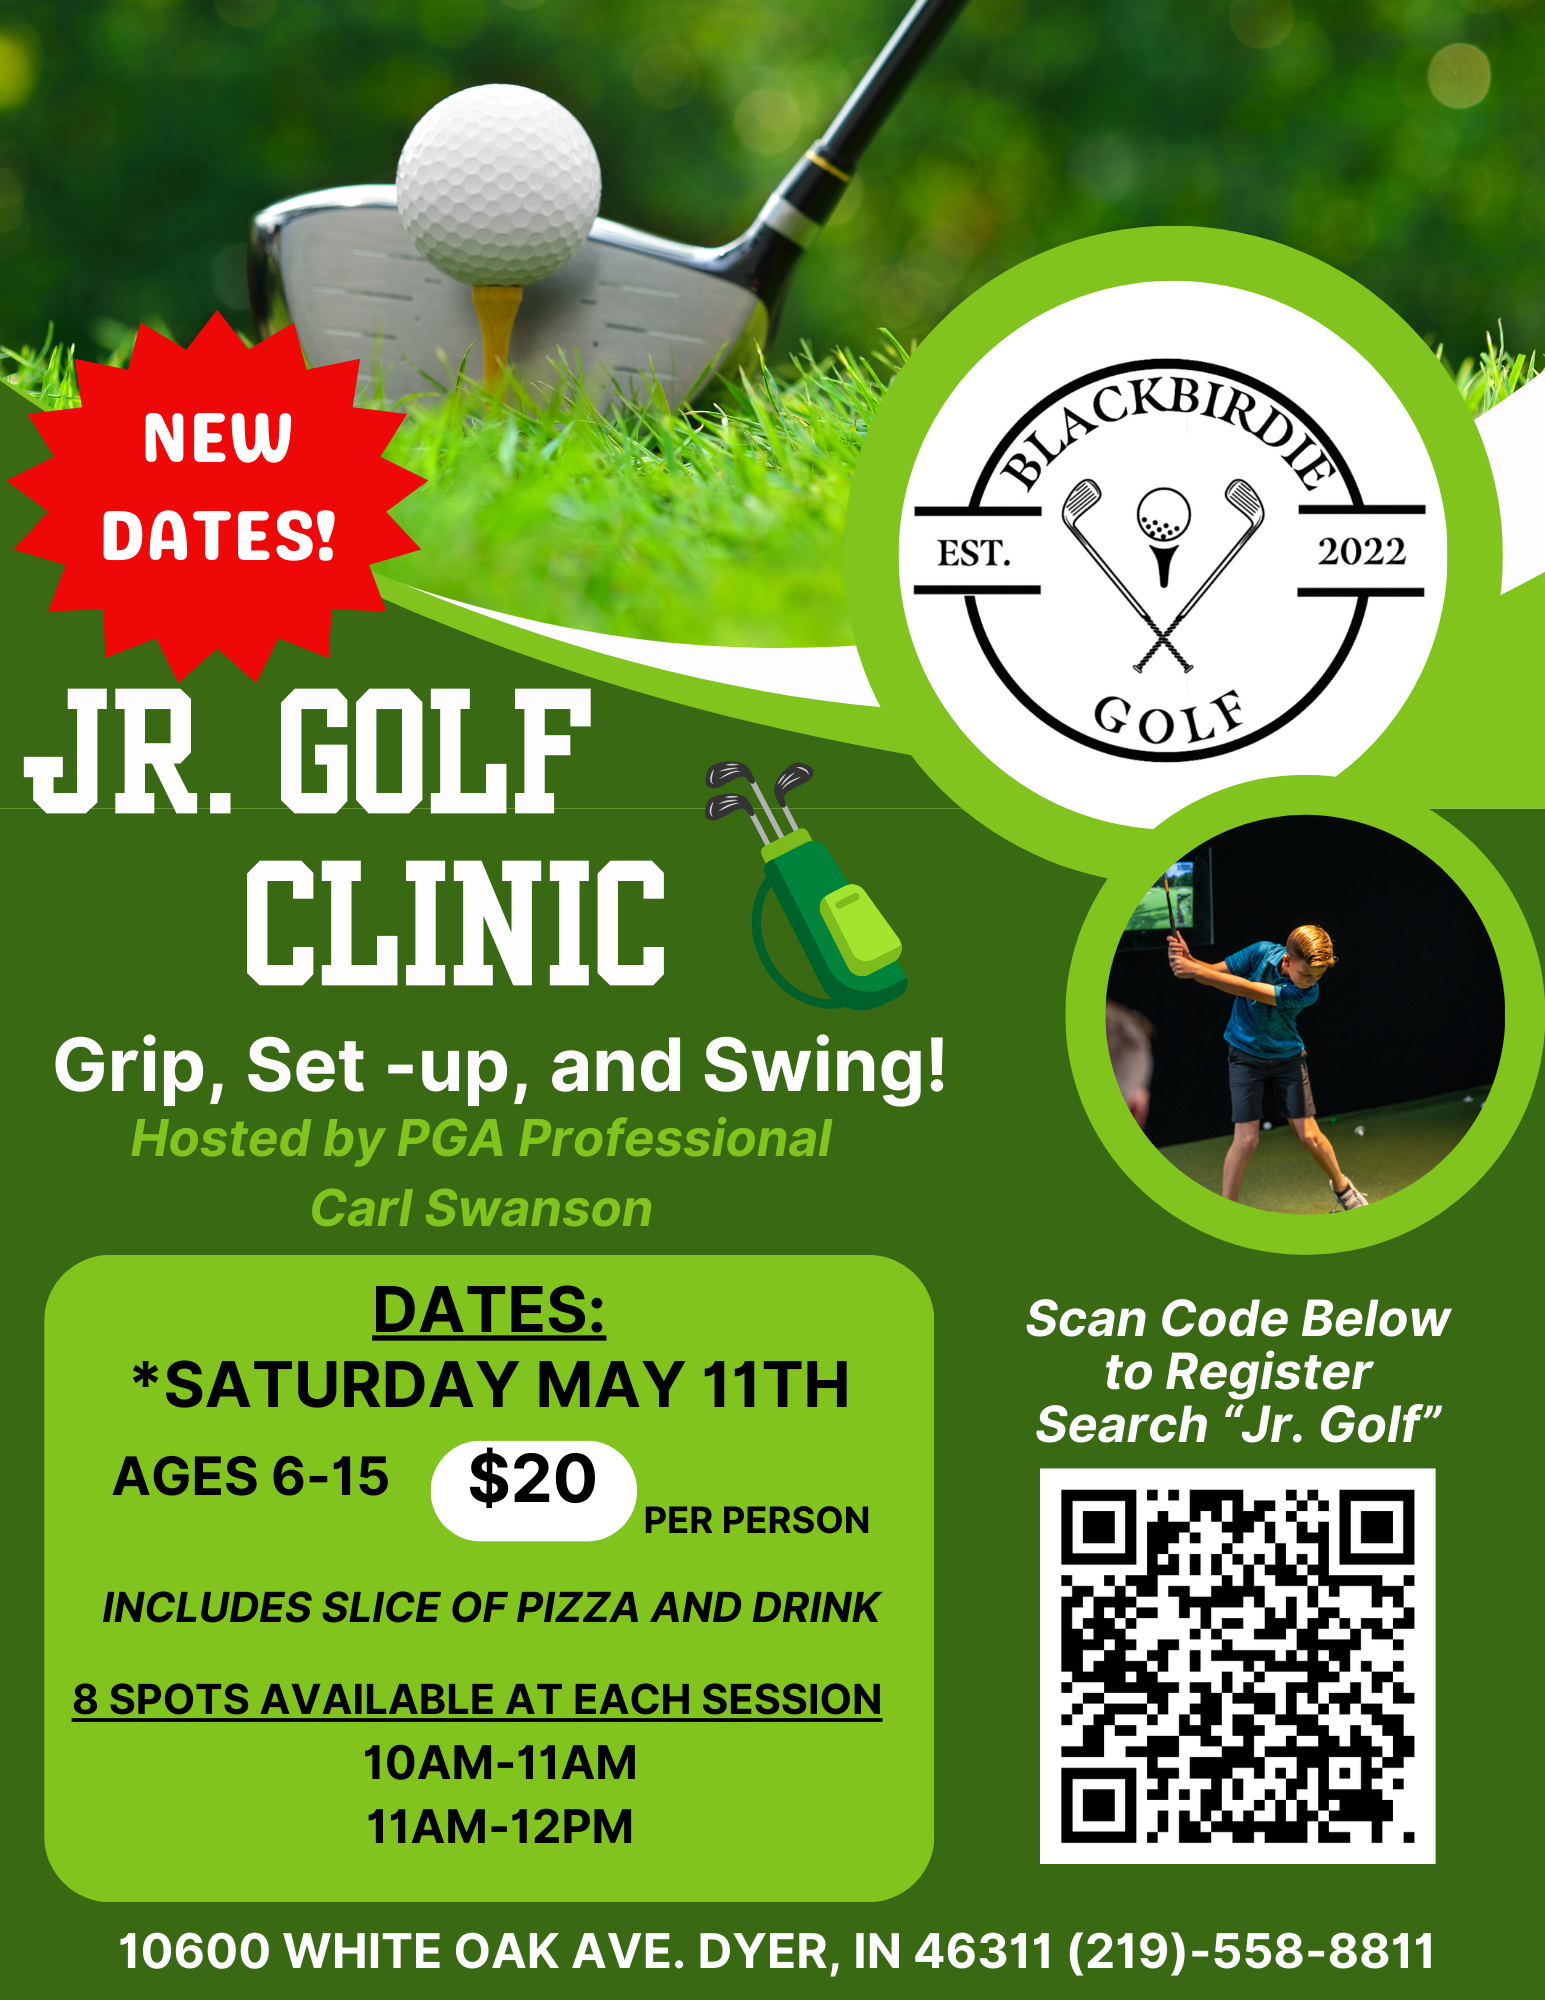 Green and White Modern Golf Lesson Flyer (2)